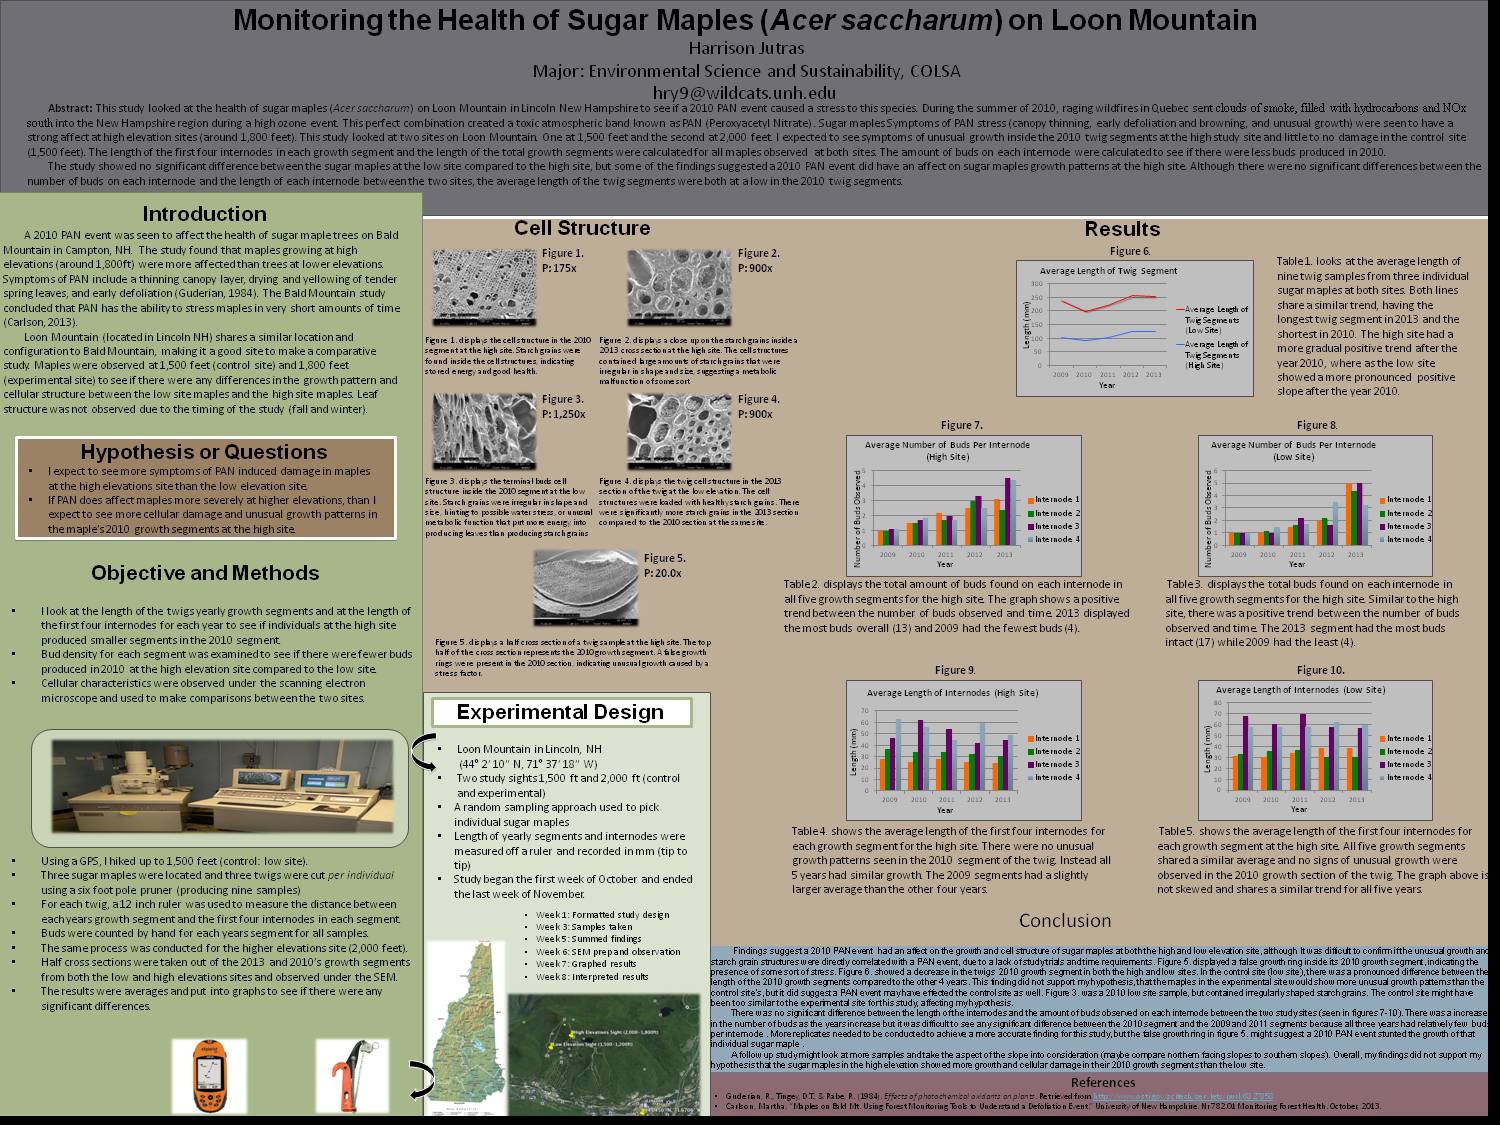 Monitoring The Health Of Sugar Maples (Acer Saccharum) On Loon Mountain  by hjutras